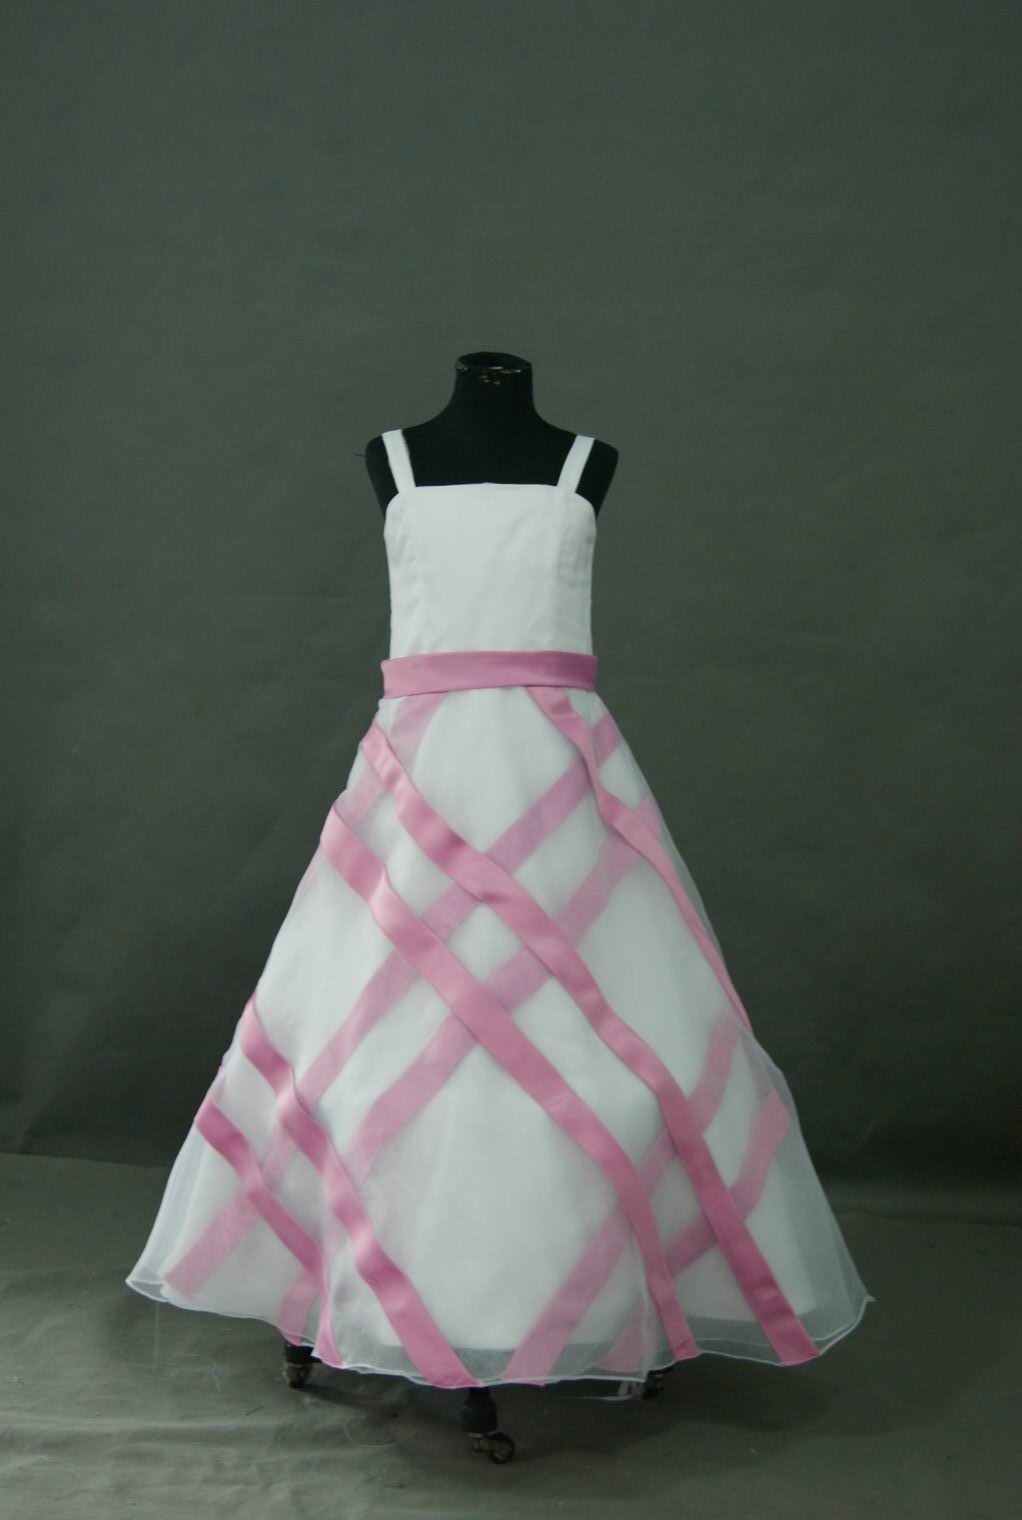 pink and white flower girl dress